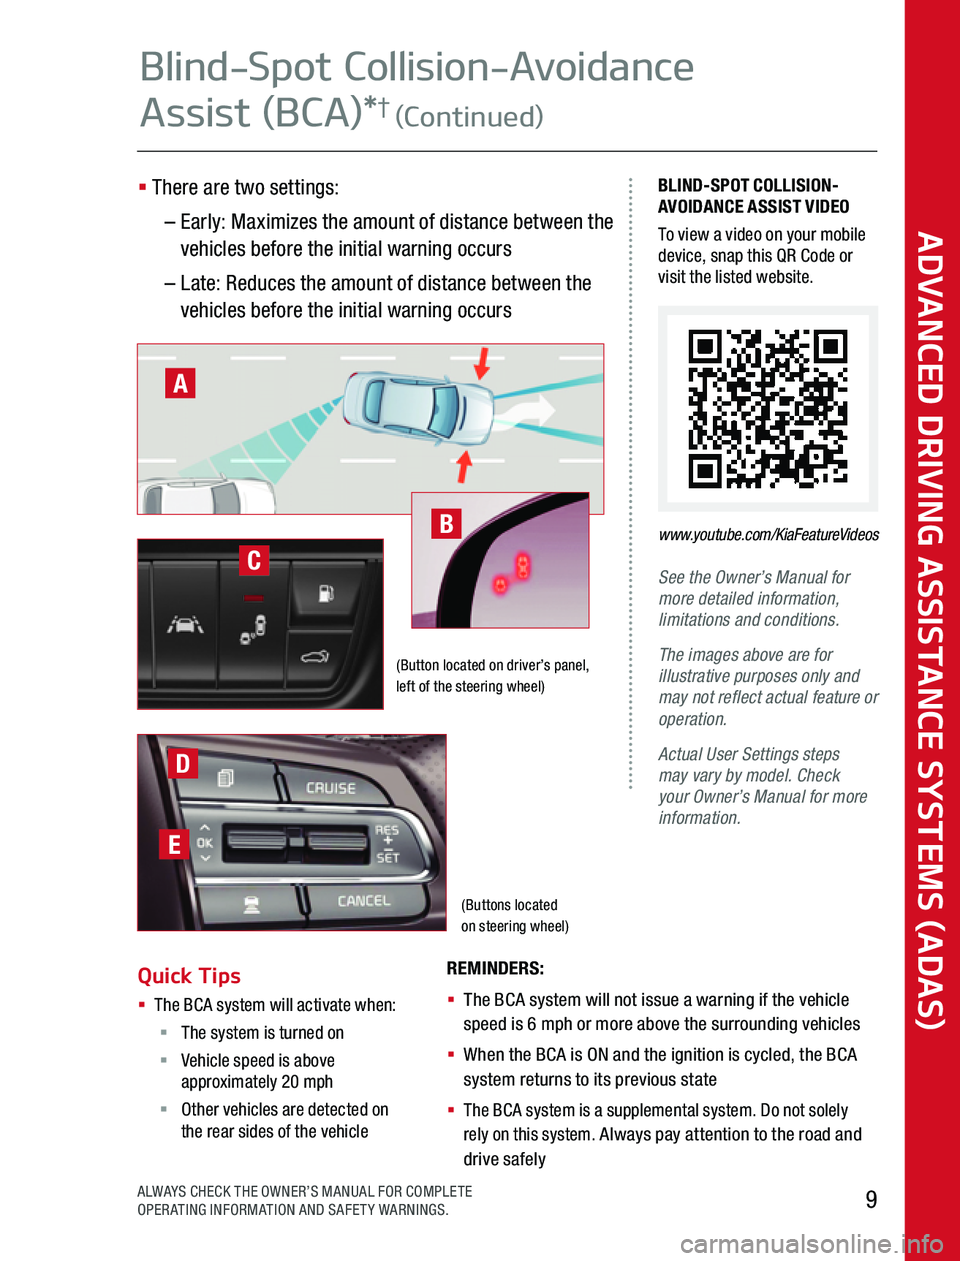 KIA OPTIMA 2020  Advanced Driving Assistance System (Buttons located  on steering wheel)
BLIND-SPOT COLLISION-AVOIDANCE ASSIST VIDEOTo view a video on your mobile device, snap this QR Code or visit the listed website  
See the Owner’s Manual for more